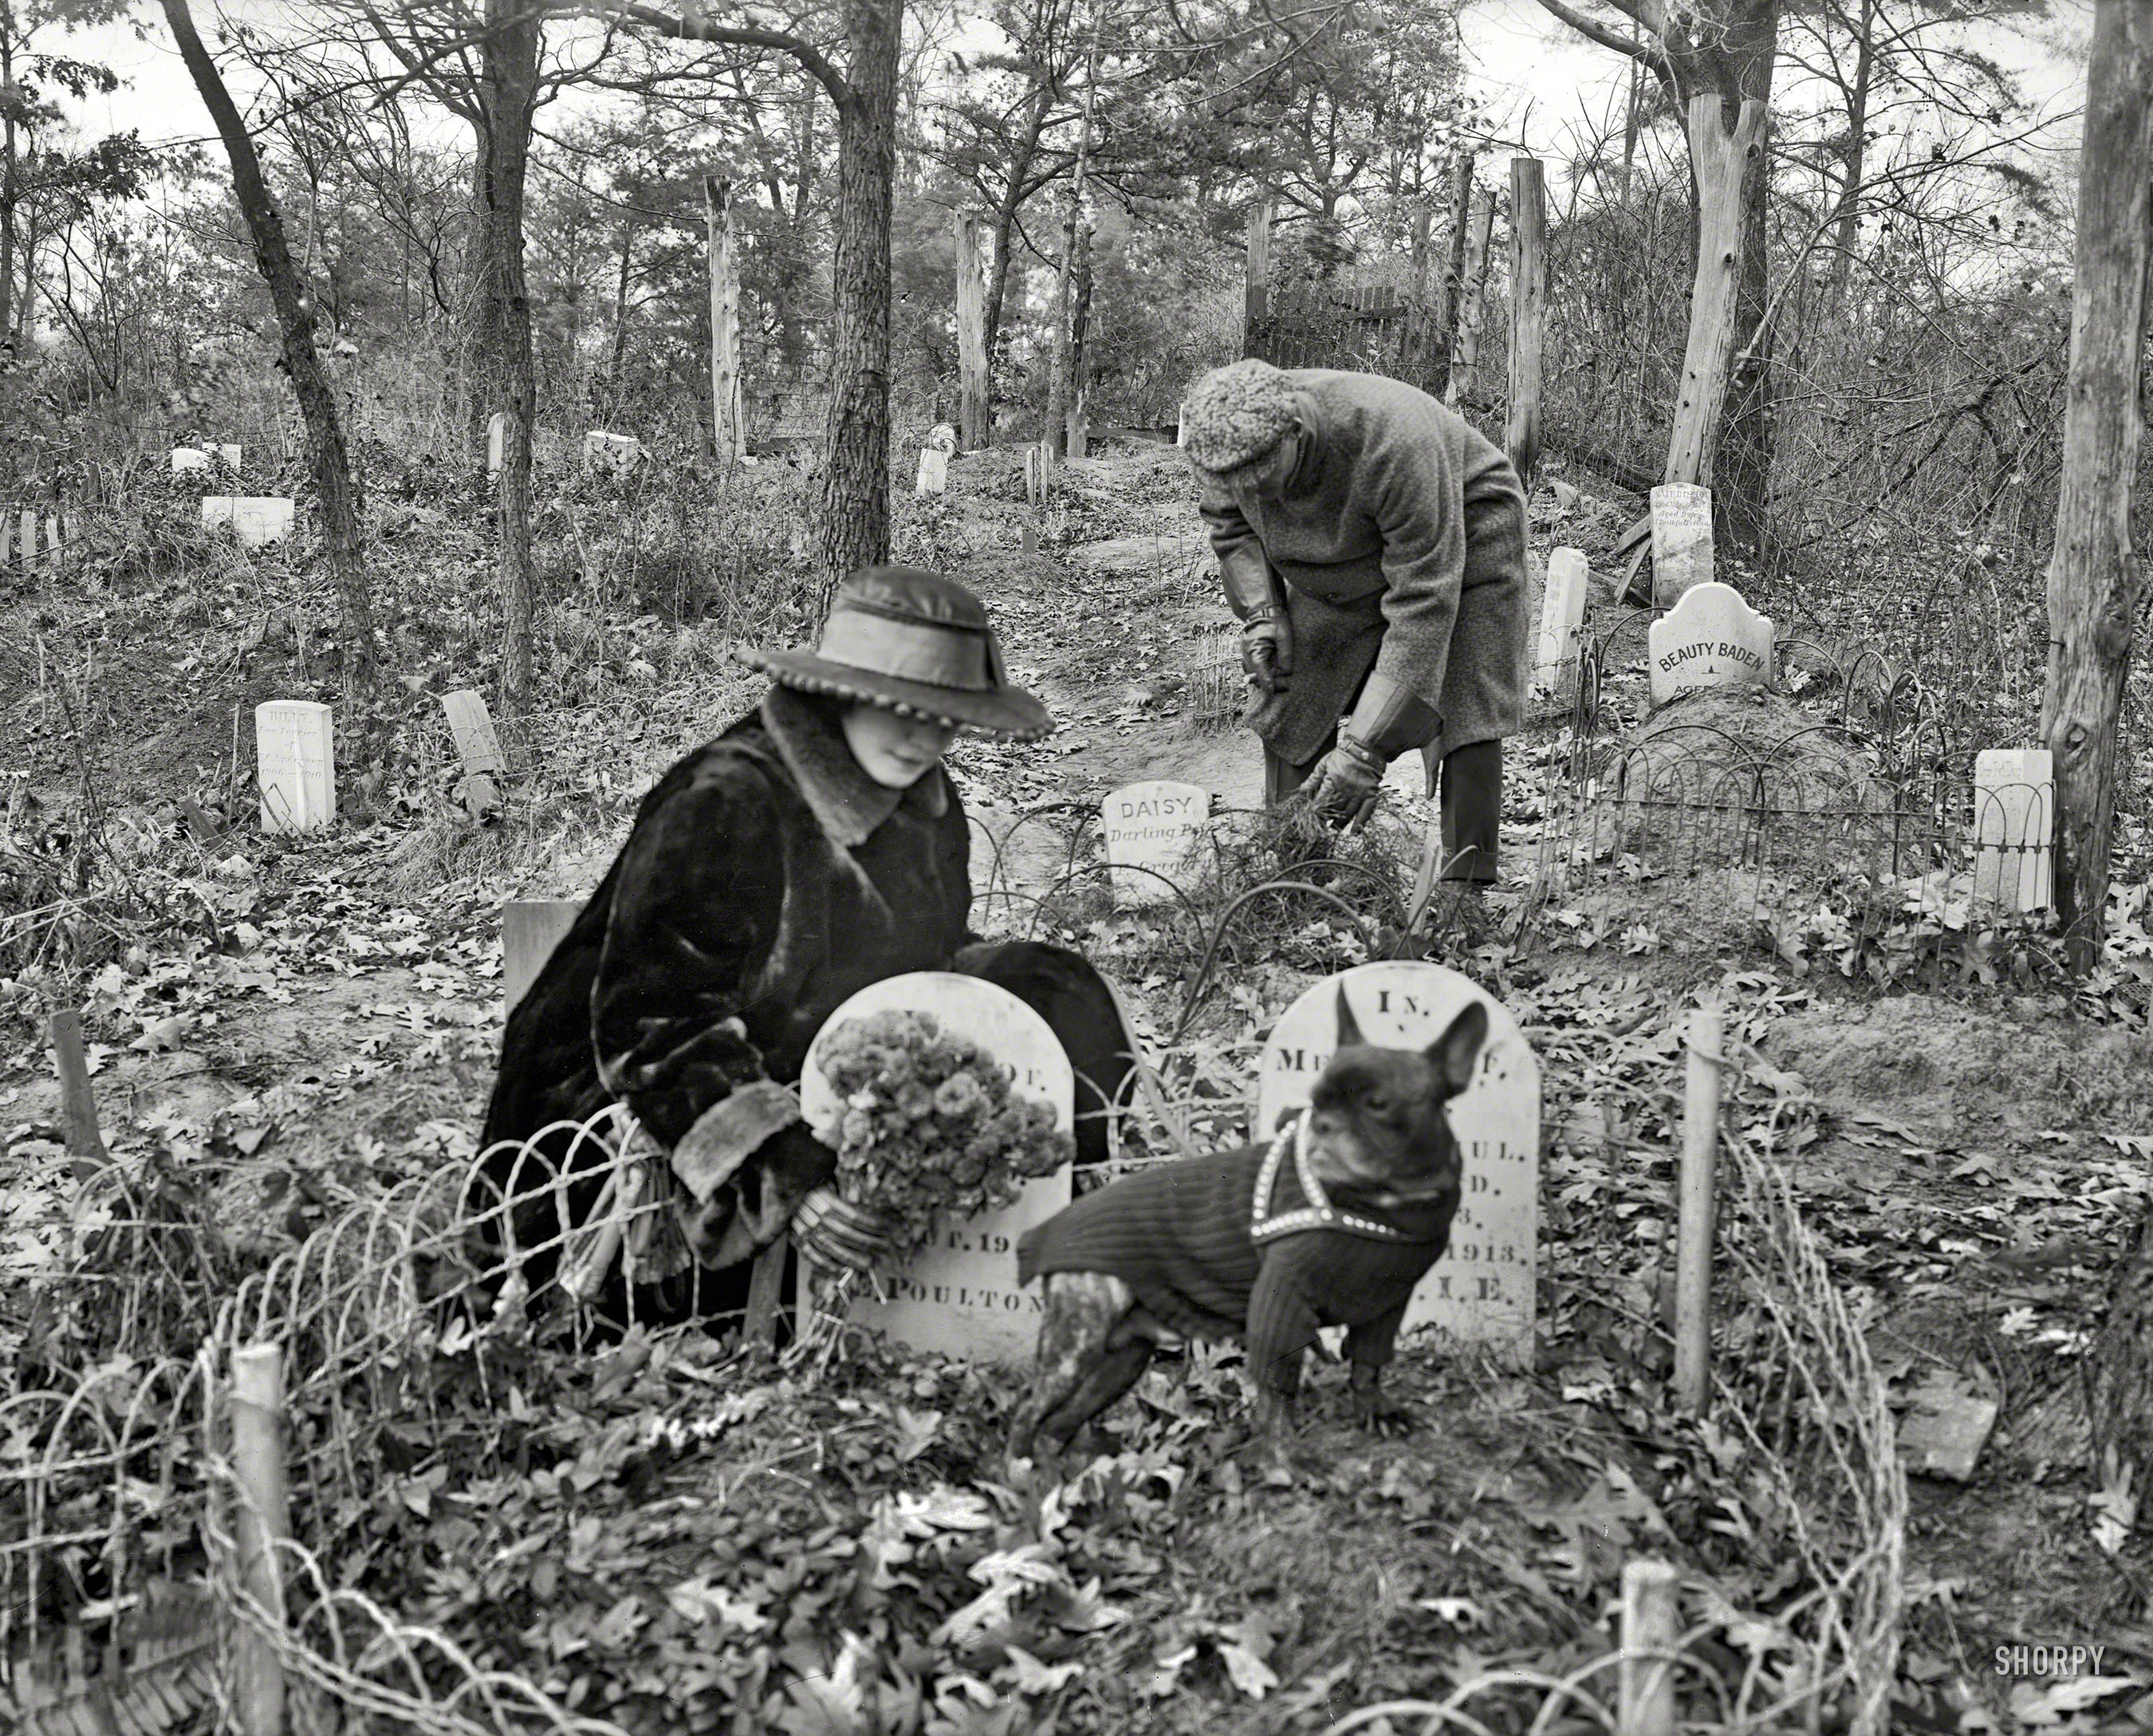 Washington, D.C., circa 1926. "Dog cemetery." Intimations of canine mortality. National Photo Company Collection glass negative. View full size.